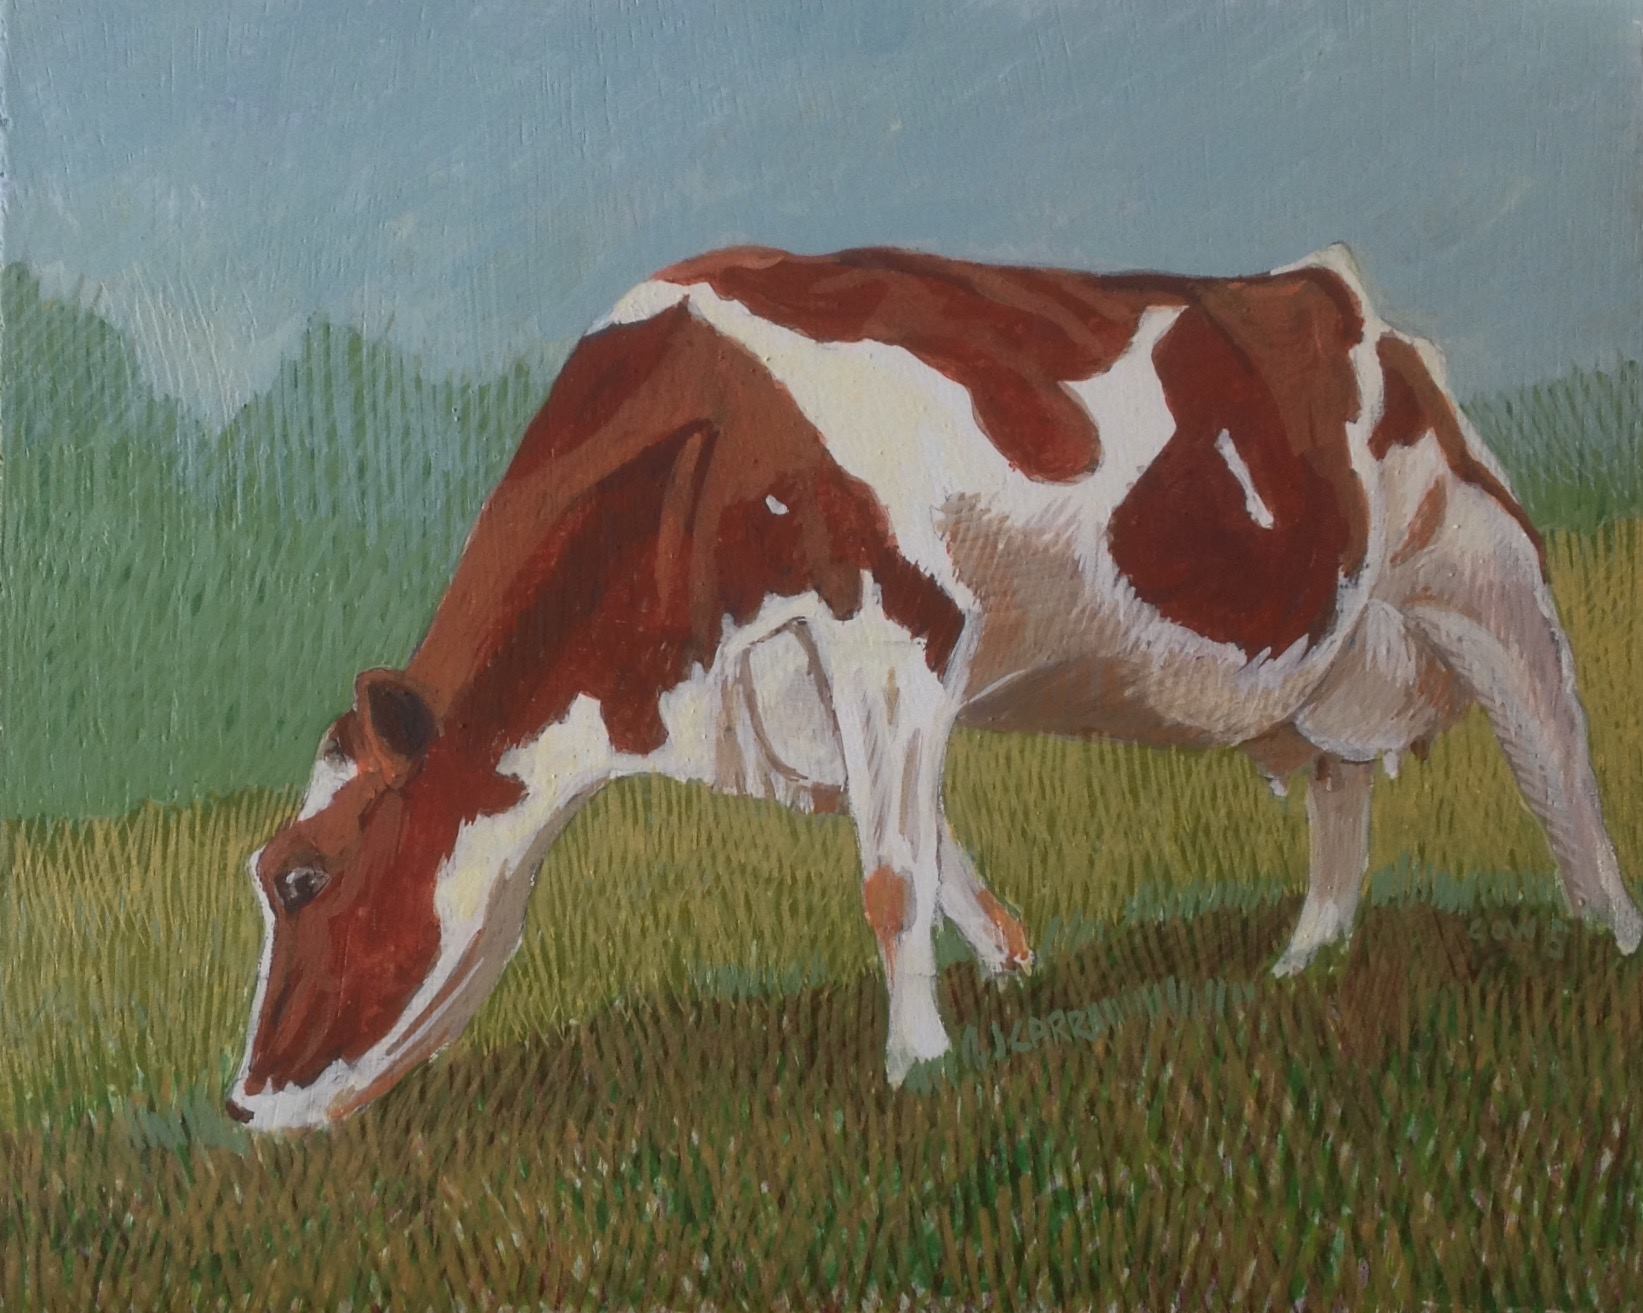 Cow 5 by Jane Carr